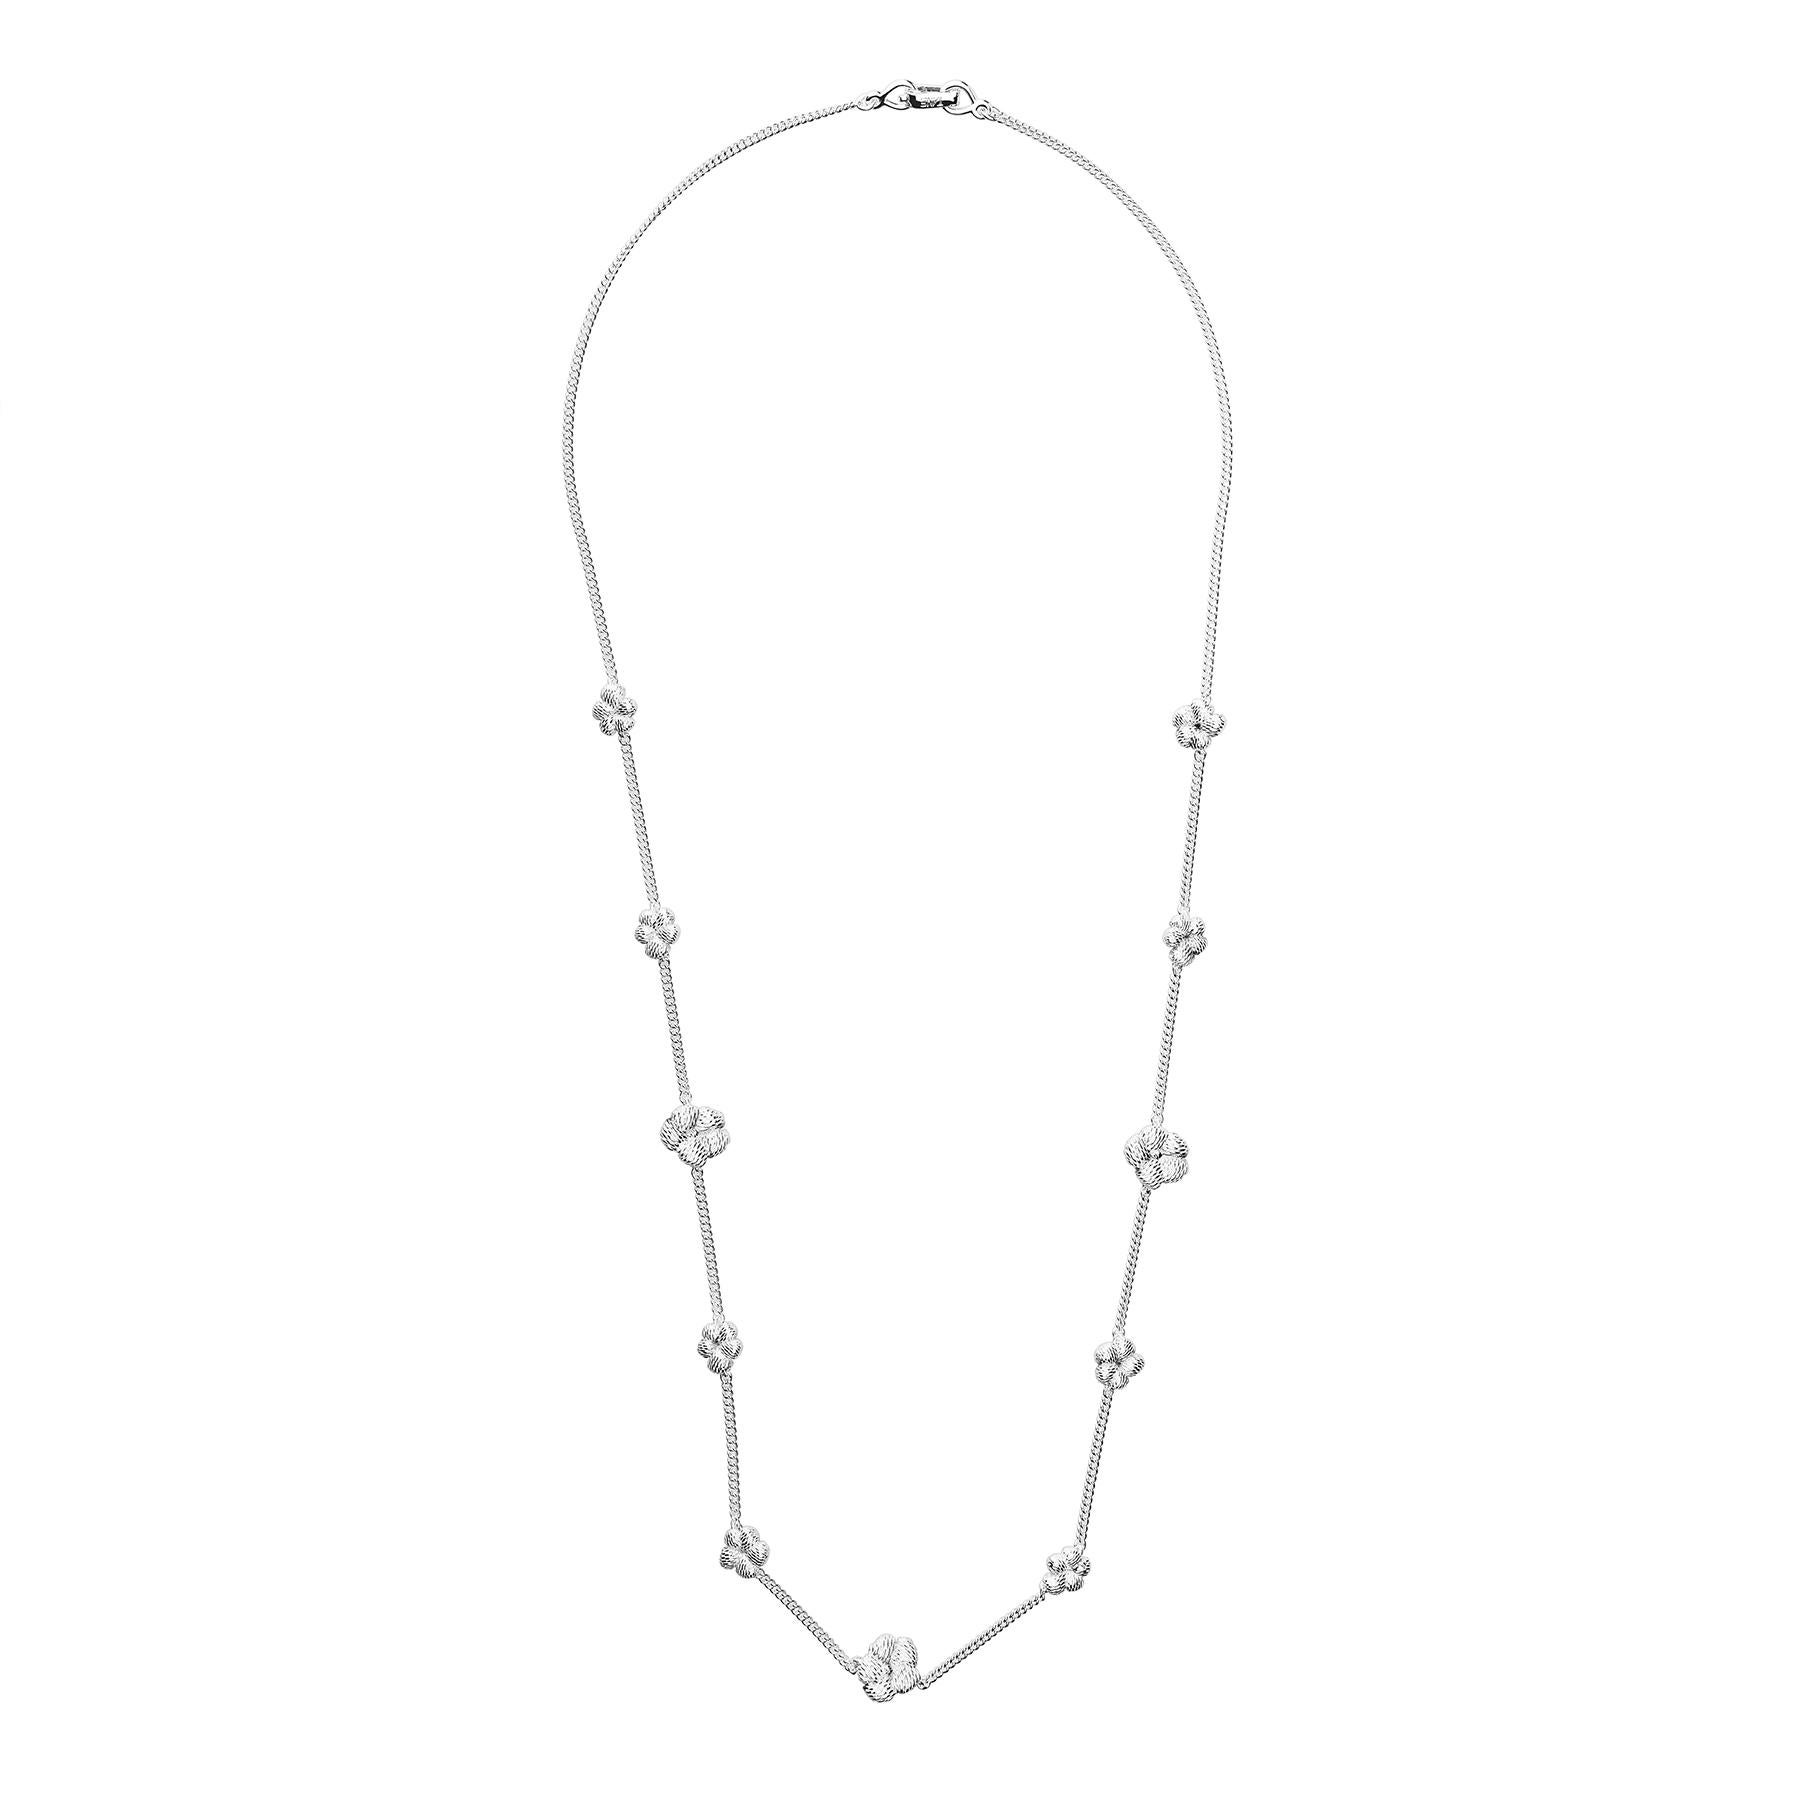 The Bordados Flowers Necklace from the Bordados Collection by TANE is handmade in sterling silver by TANE's expert artisans in Mexico. With a total length of 23.6